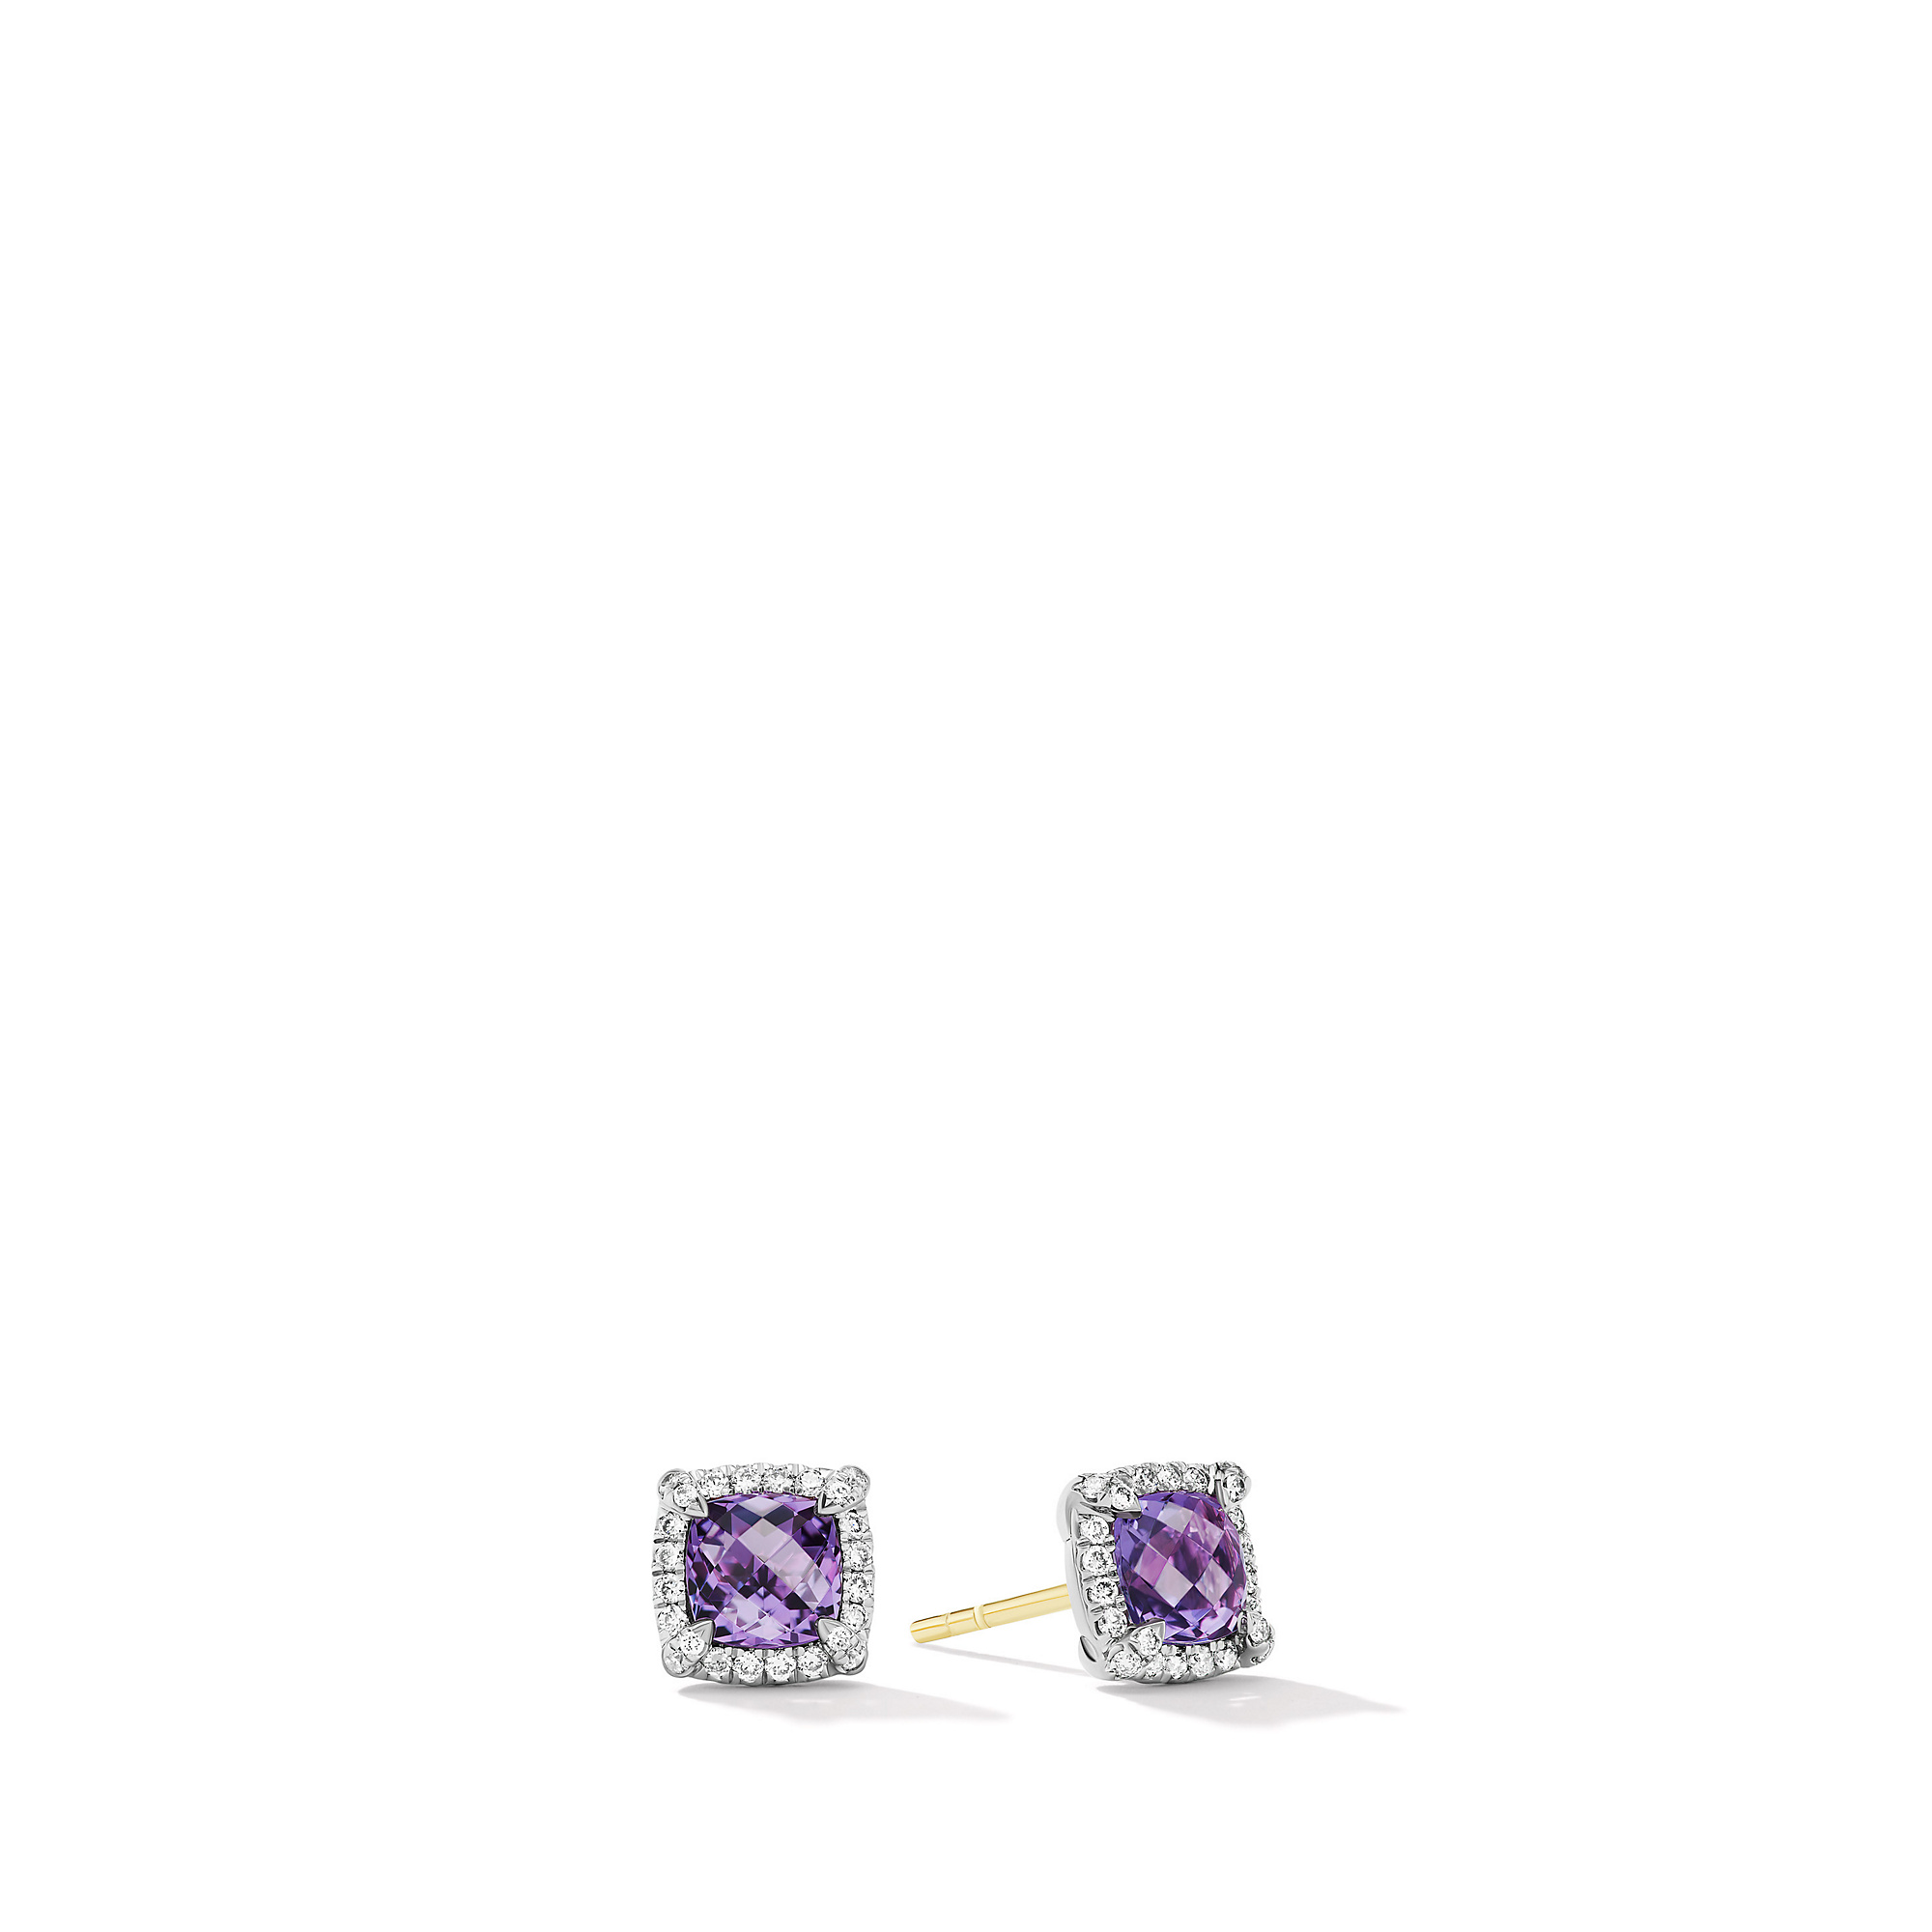 Petite Chatelaine® Pave Bezel Stud Earrings in Sterling Silver with Amethyst and Diamonds